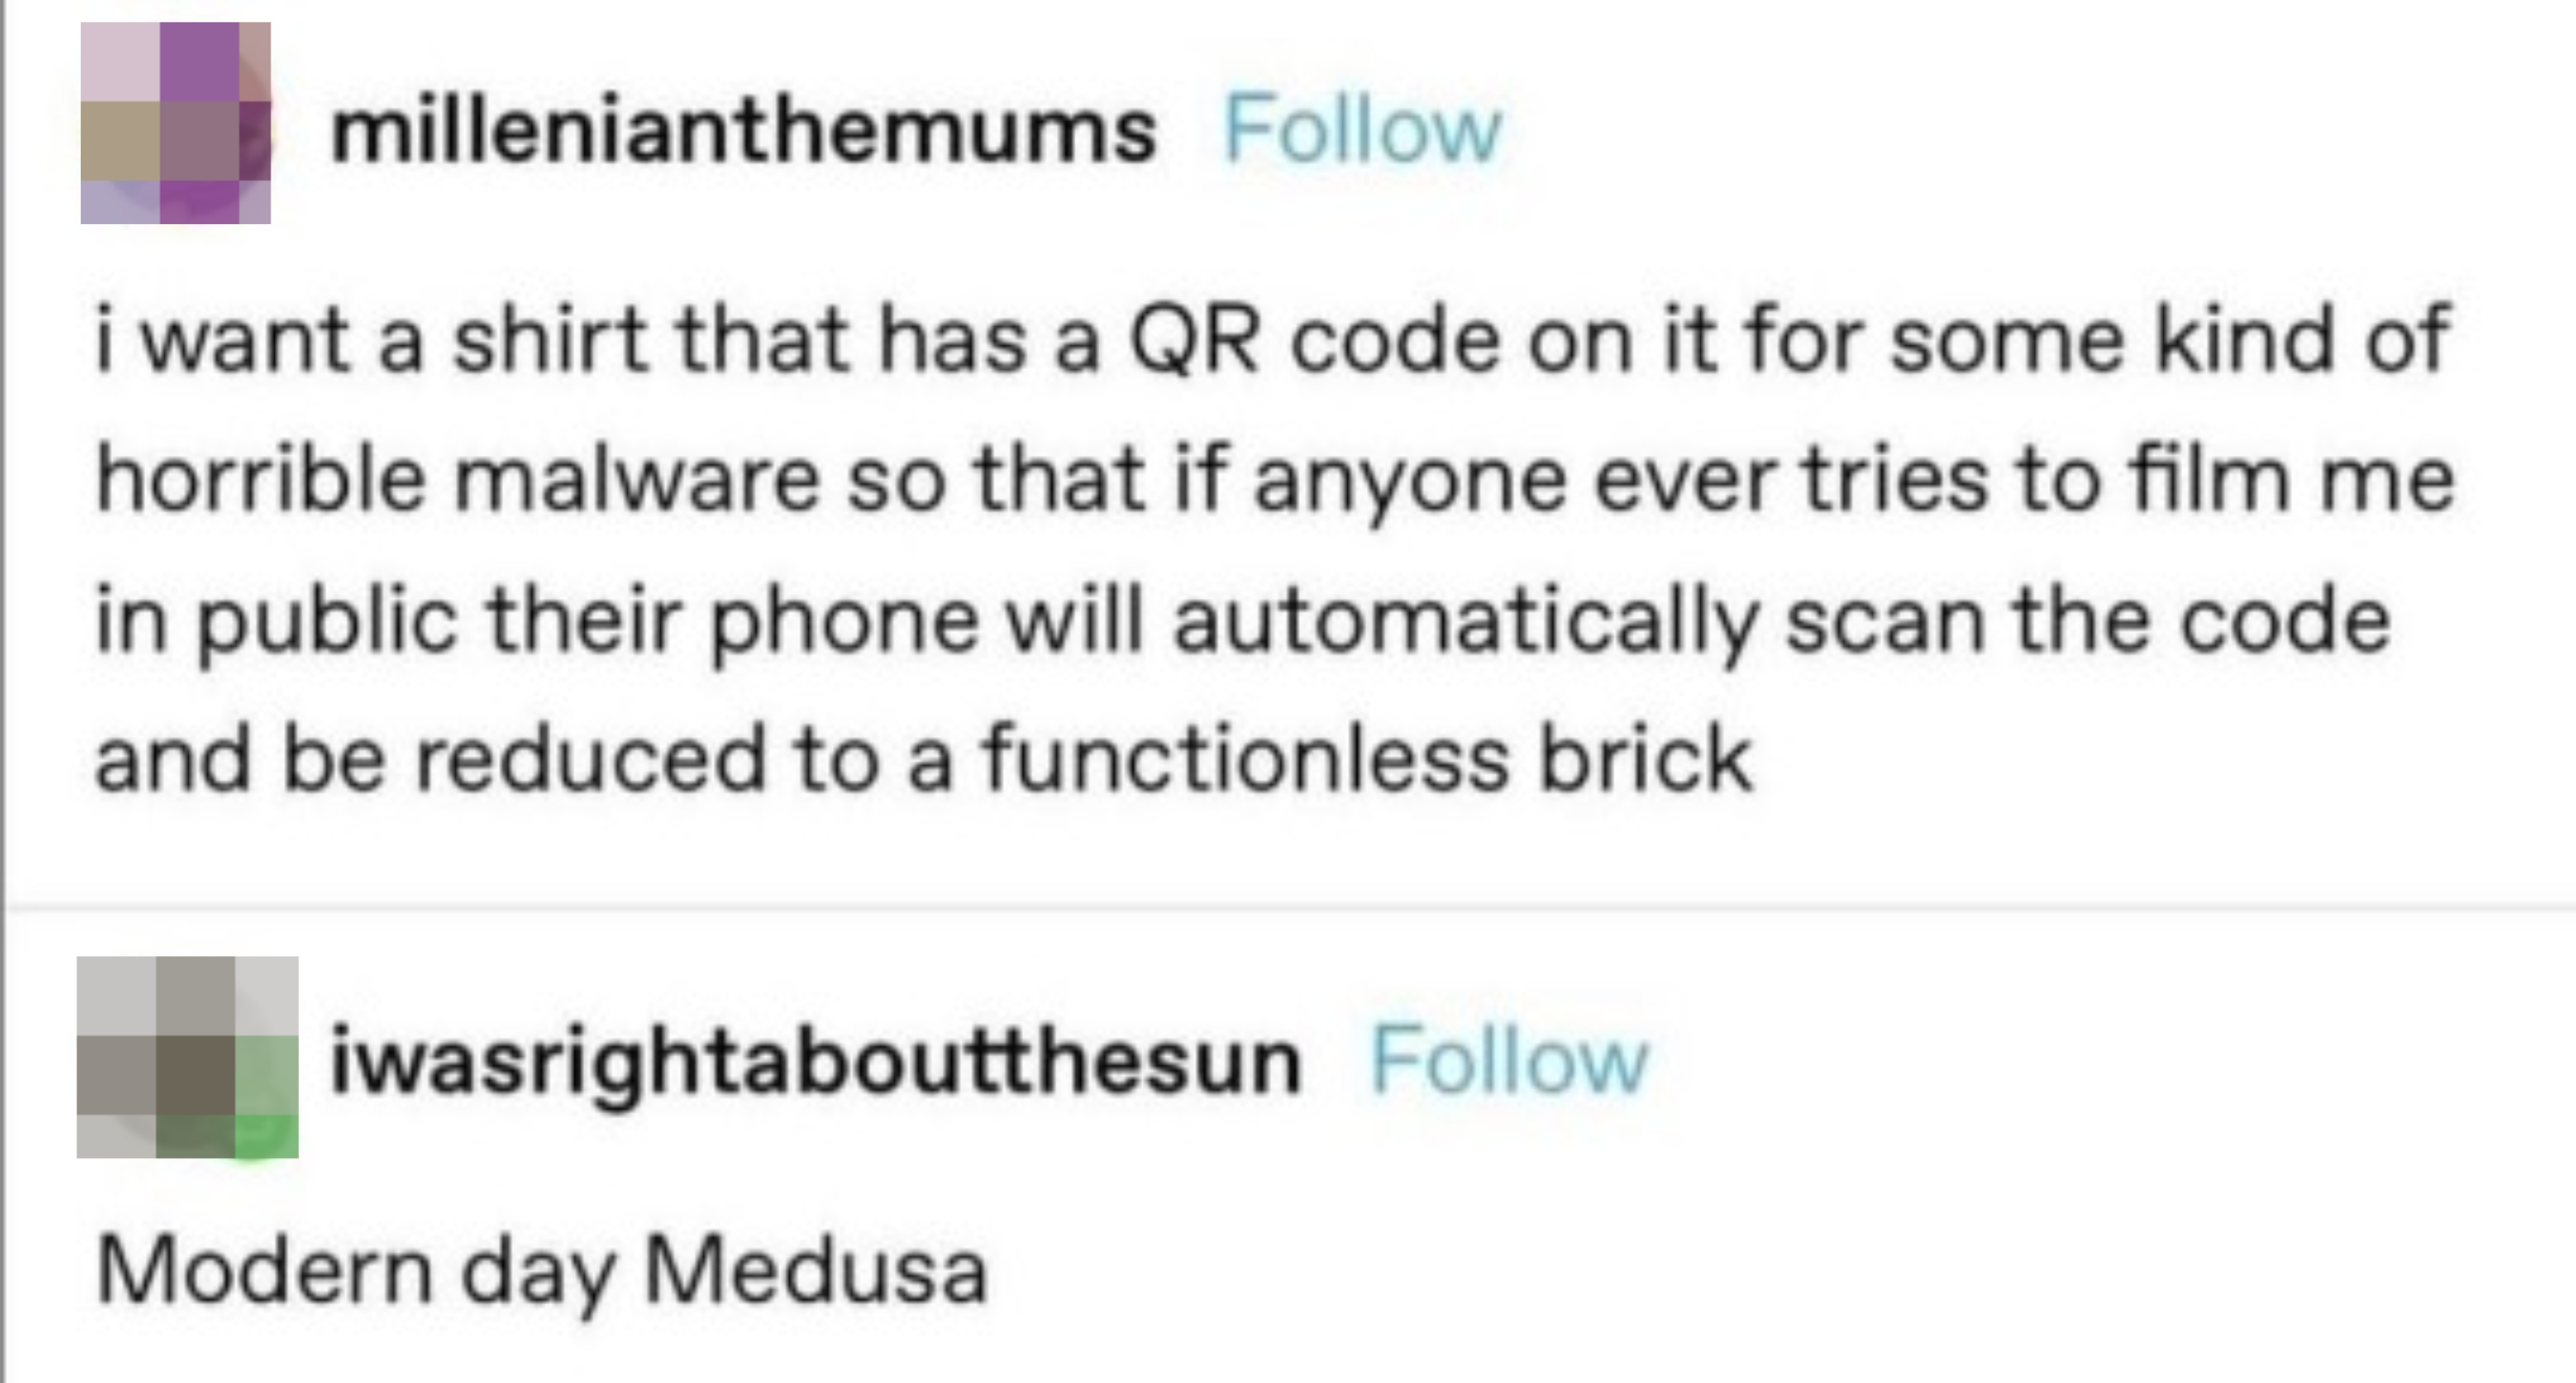 &quot;I want a shirt that has a QR code on it for some kind of. horrible malware so that if anyone ever tries to film me in public their phone will automatically scan the code and be reduced to a functionless brick&quot; &quot;Modern-day Medusa&quot;